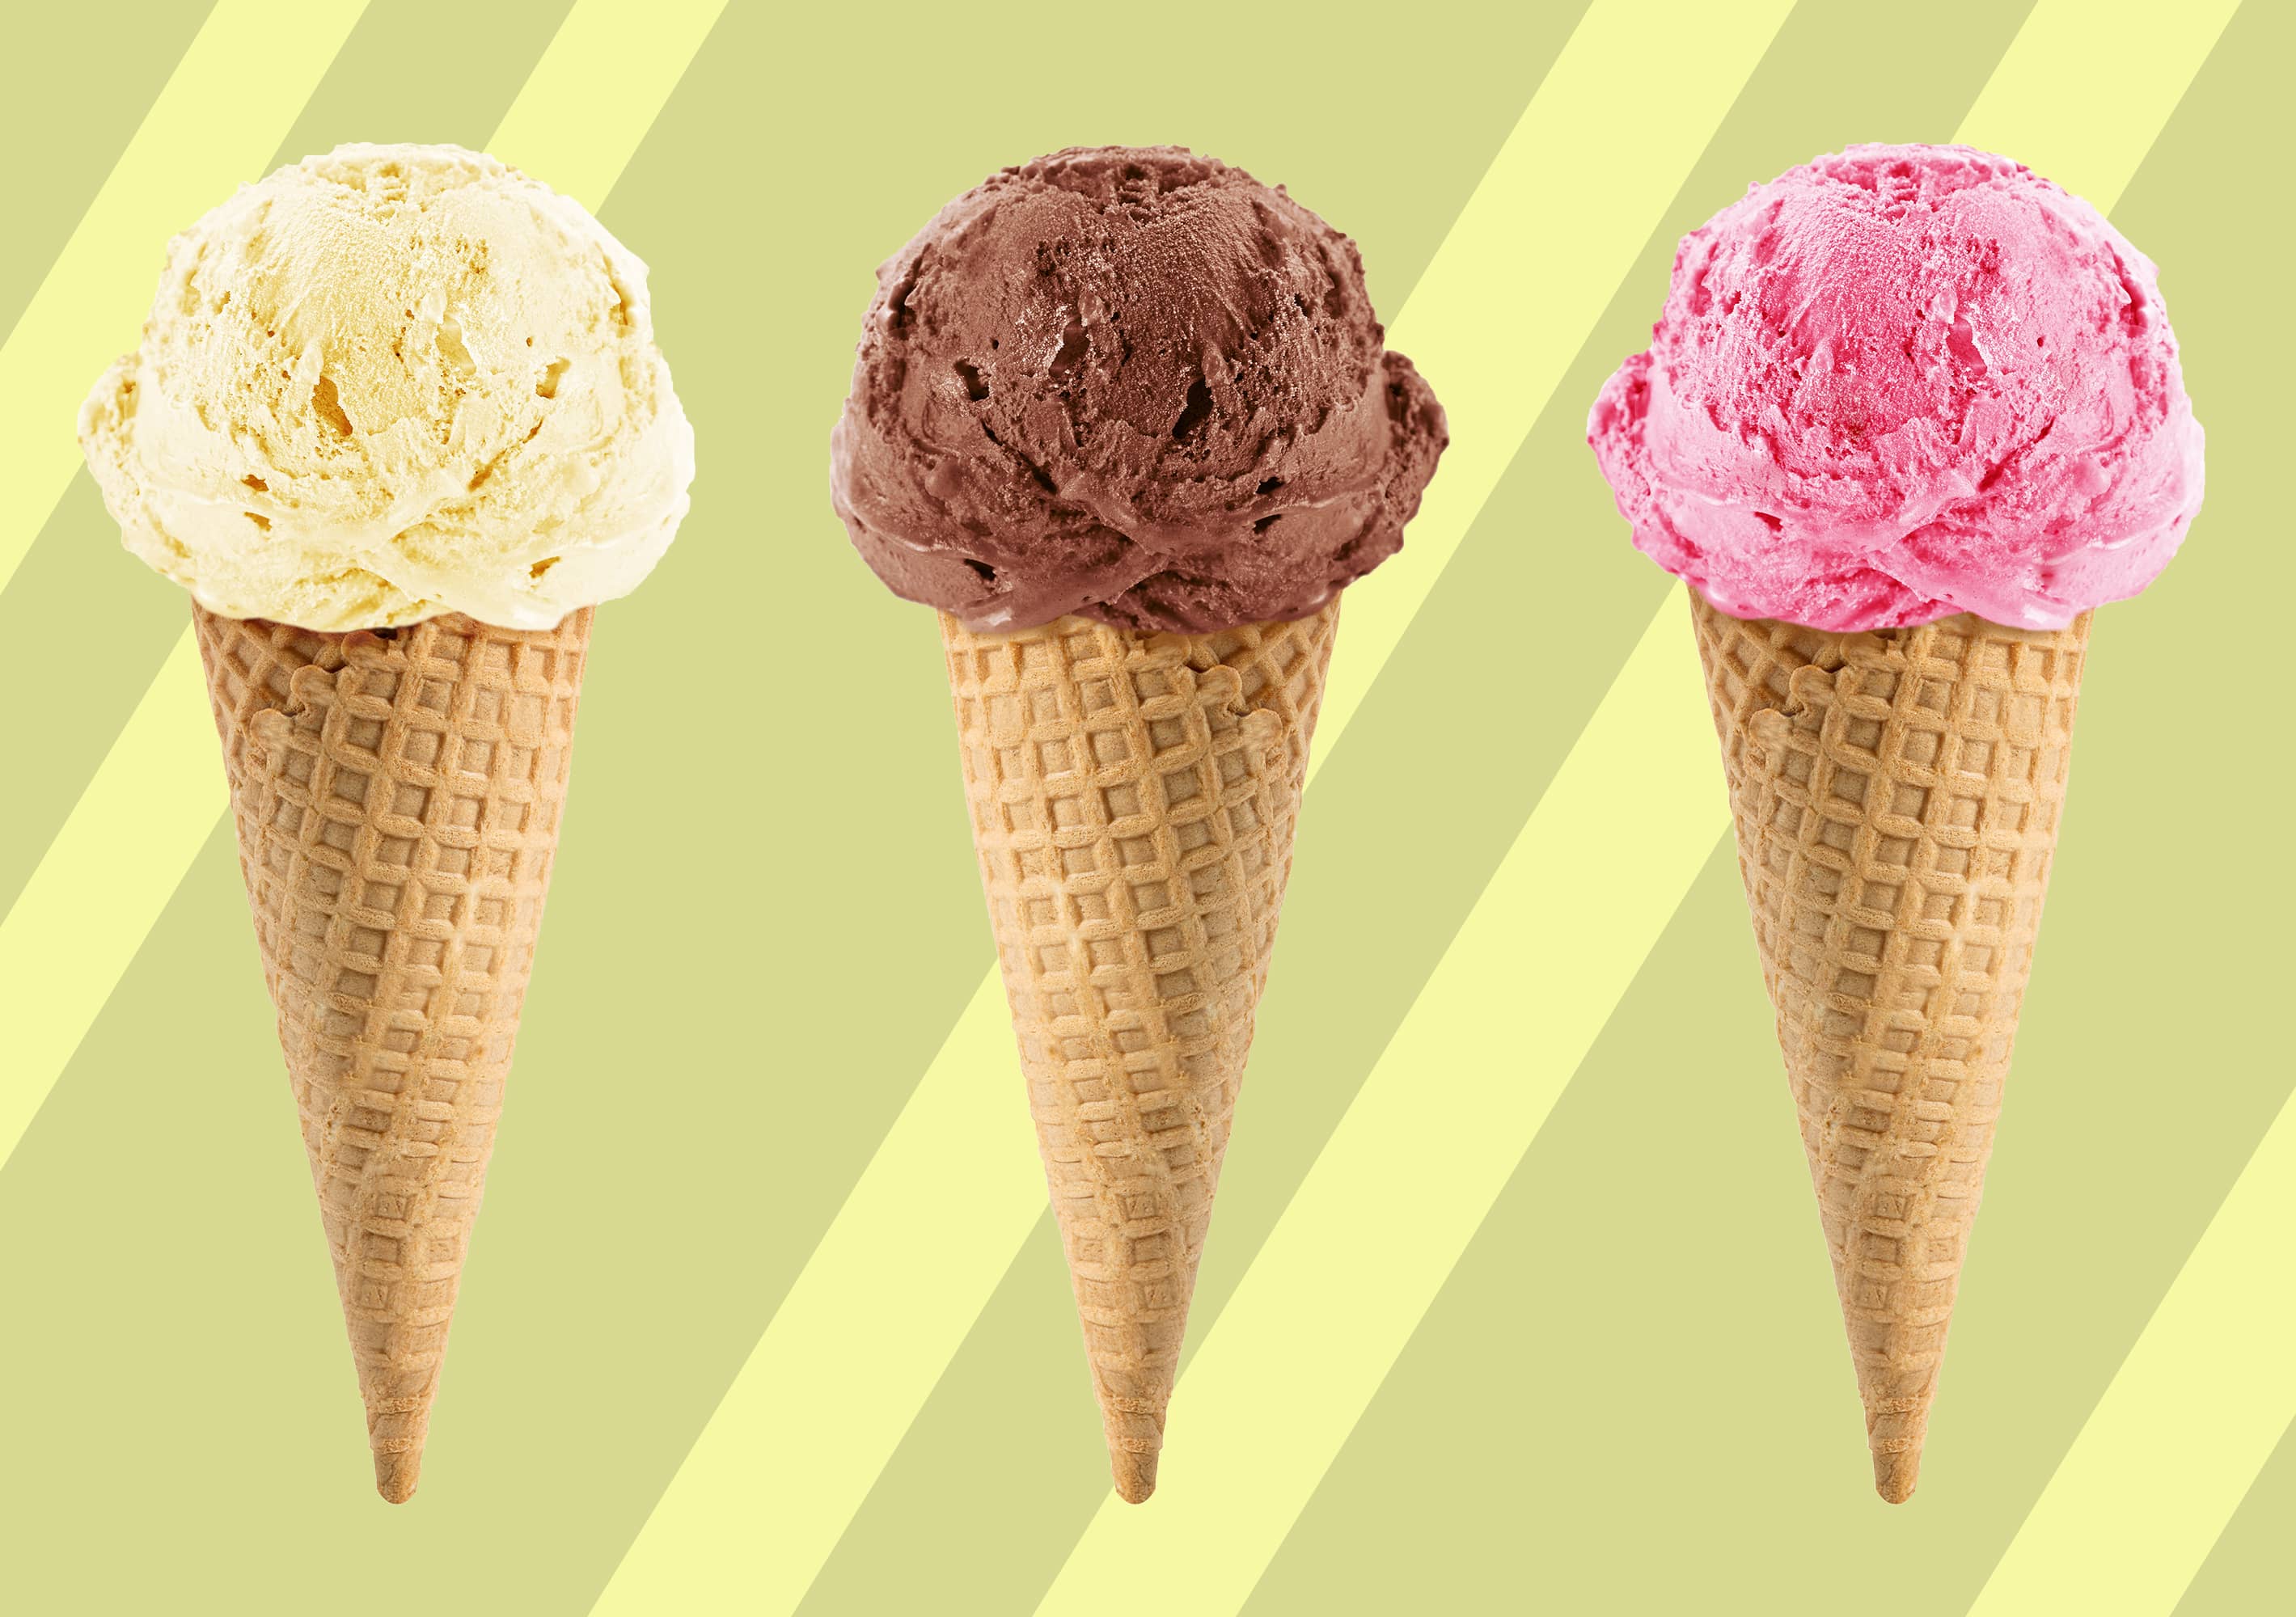 Summers Are Here: Industrial Ice Cream or Artisanal Ice Cream